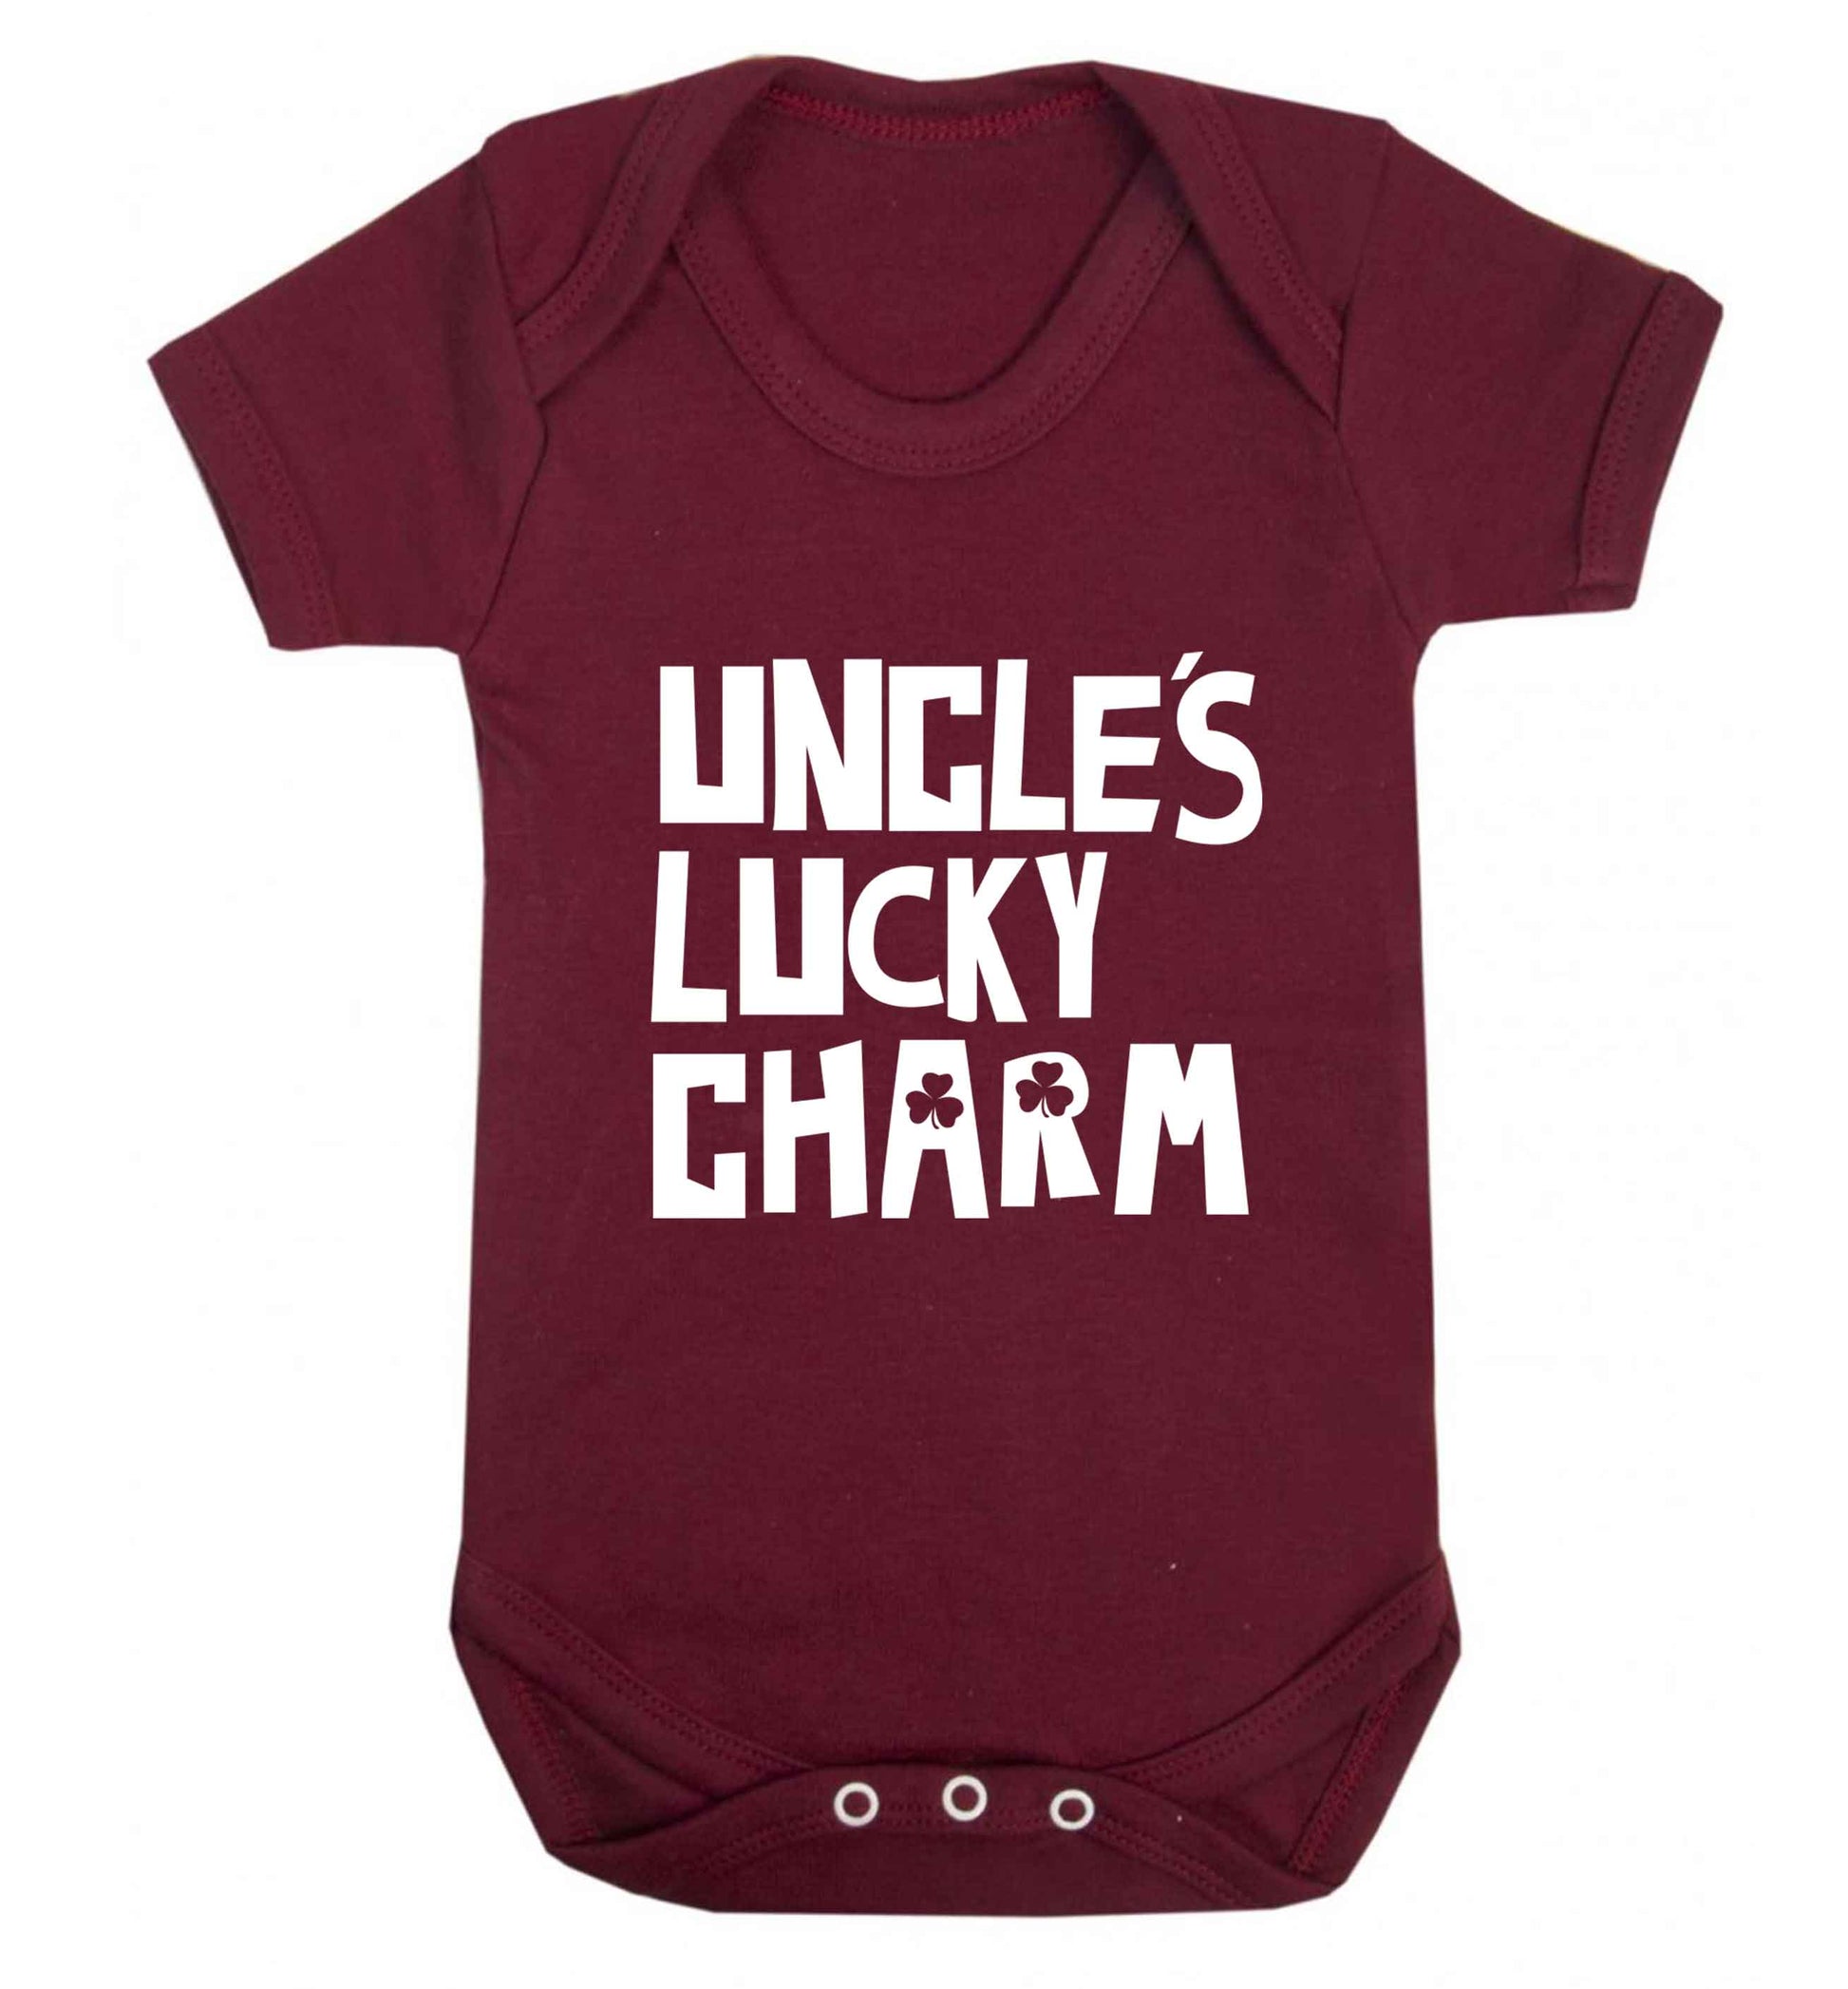 Uncles lucky charm baby vest maroon 18-24 months